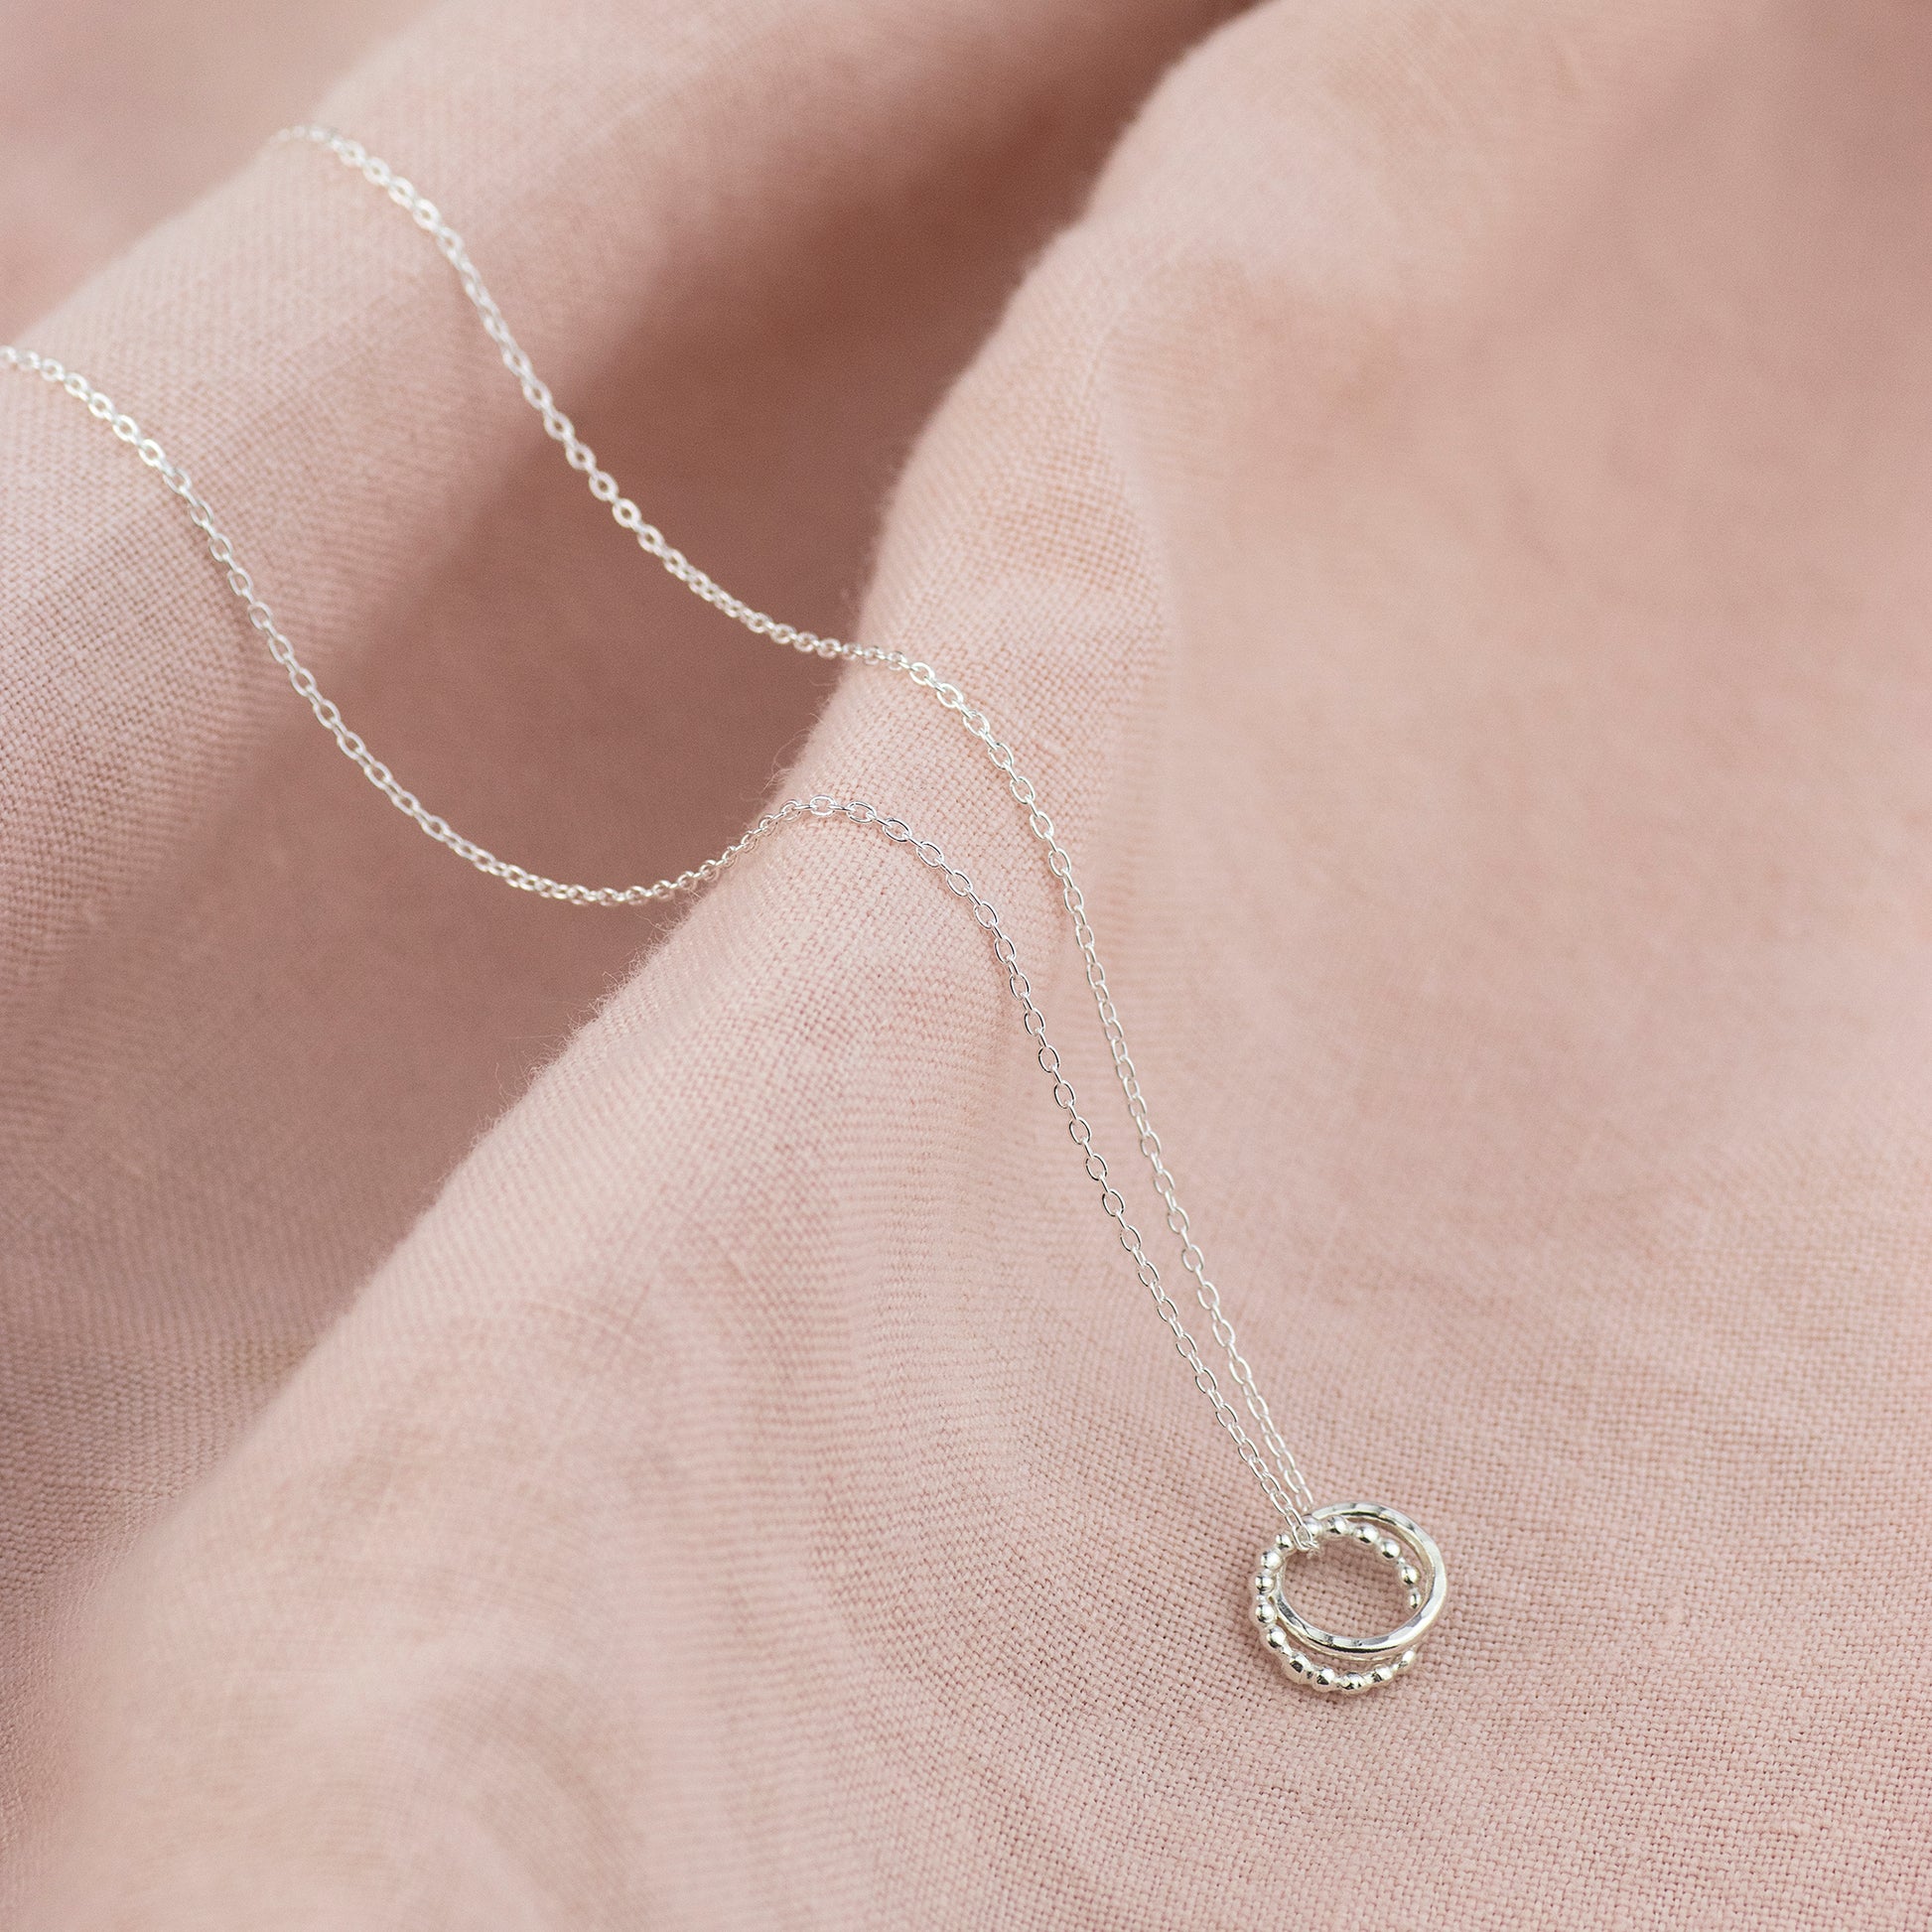 Friends Necklace - Gift for Friend - Silver Love Knot Necklace